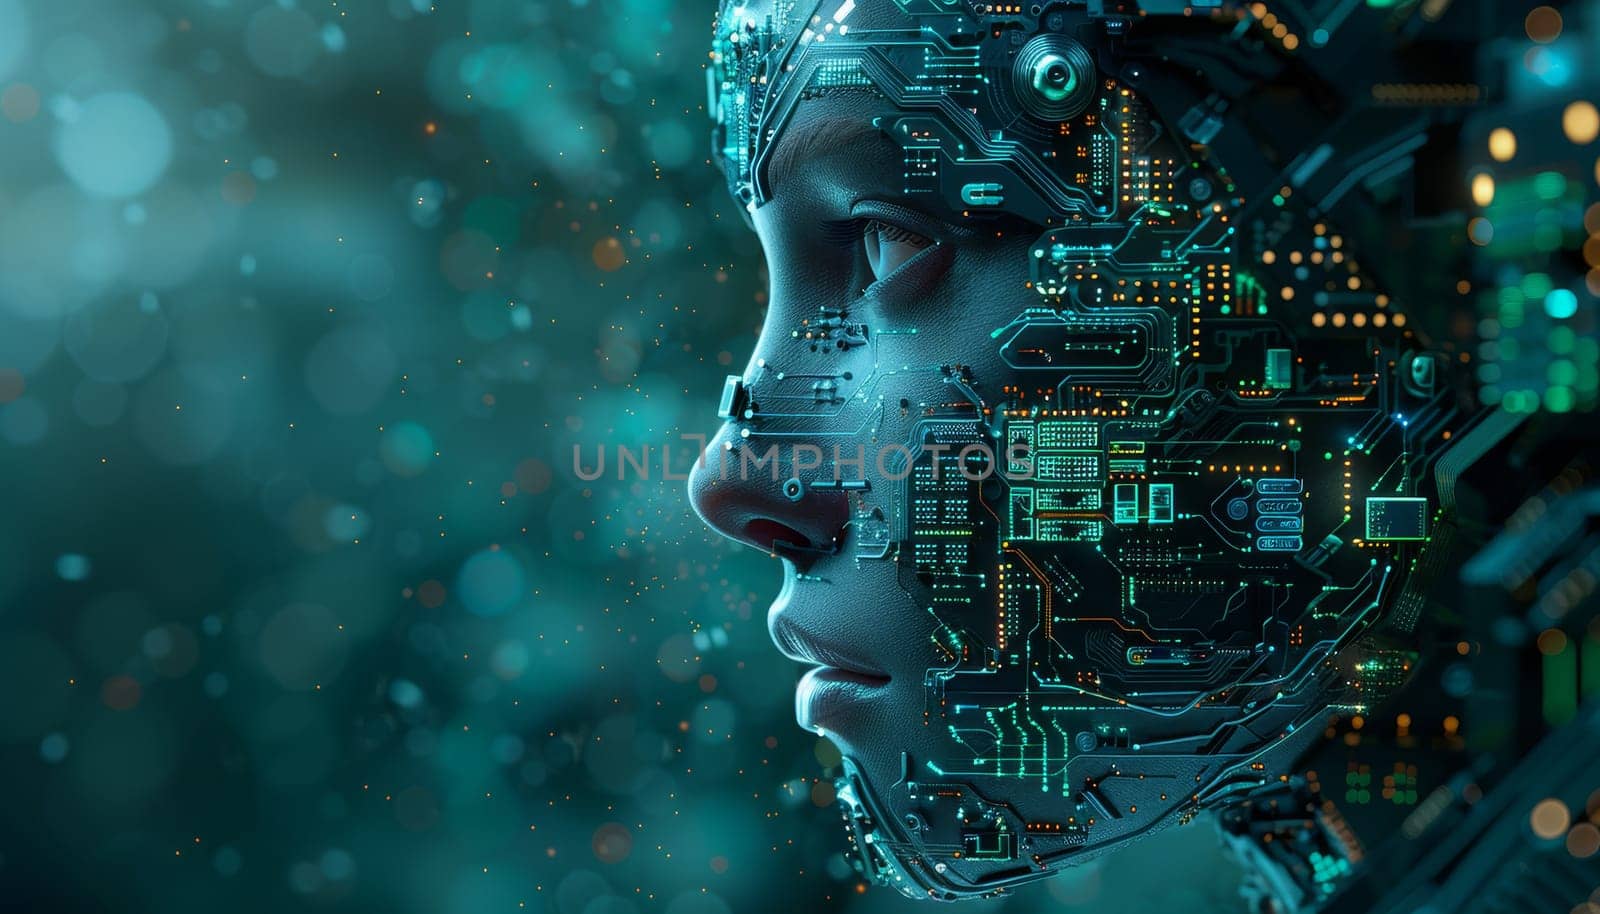 A woman's face is made of computer chips and wires by AI generated image.